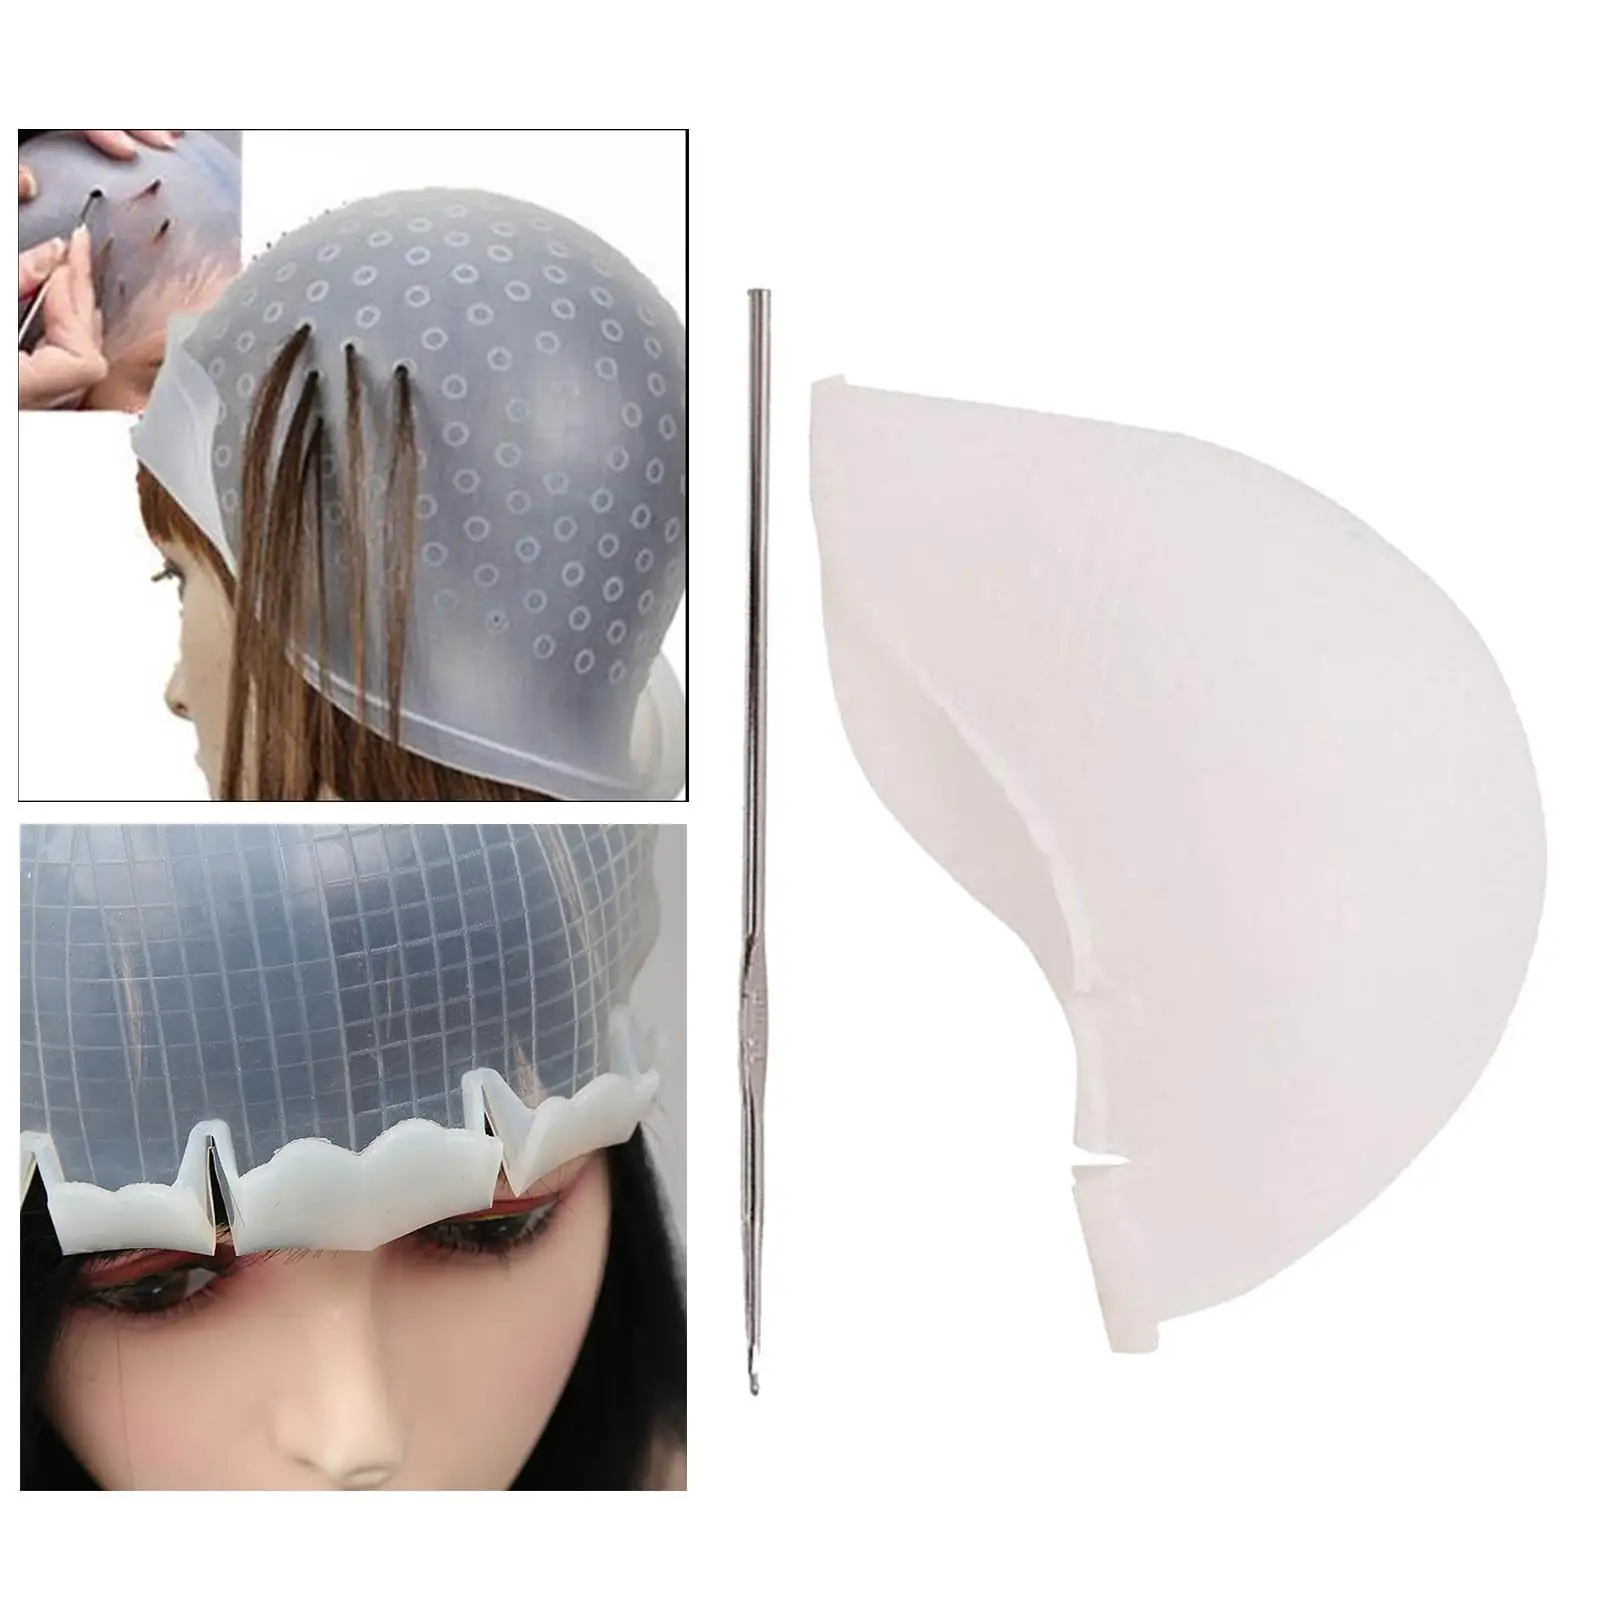 Highlight Hat Reusable with Hair Hook Hair Dyeing Hat for Hairdressing Tools